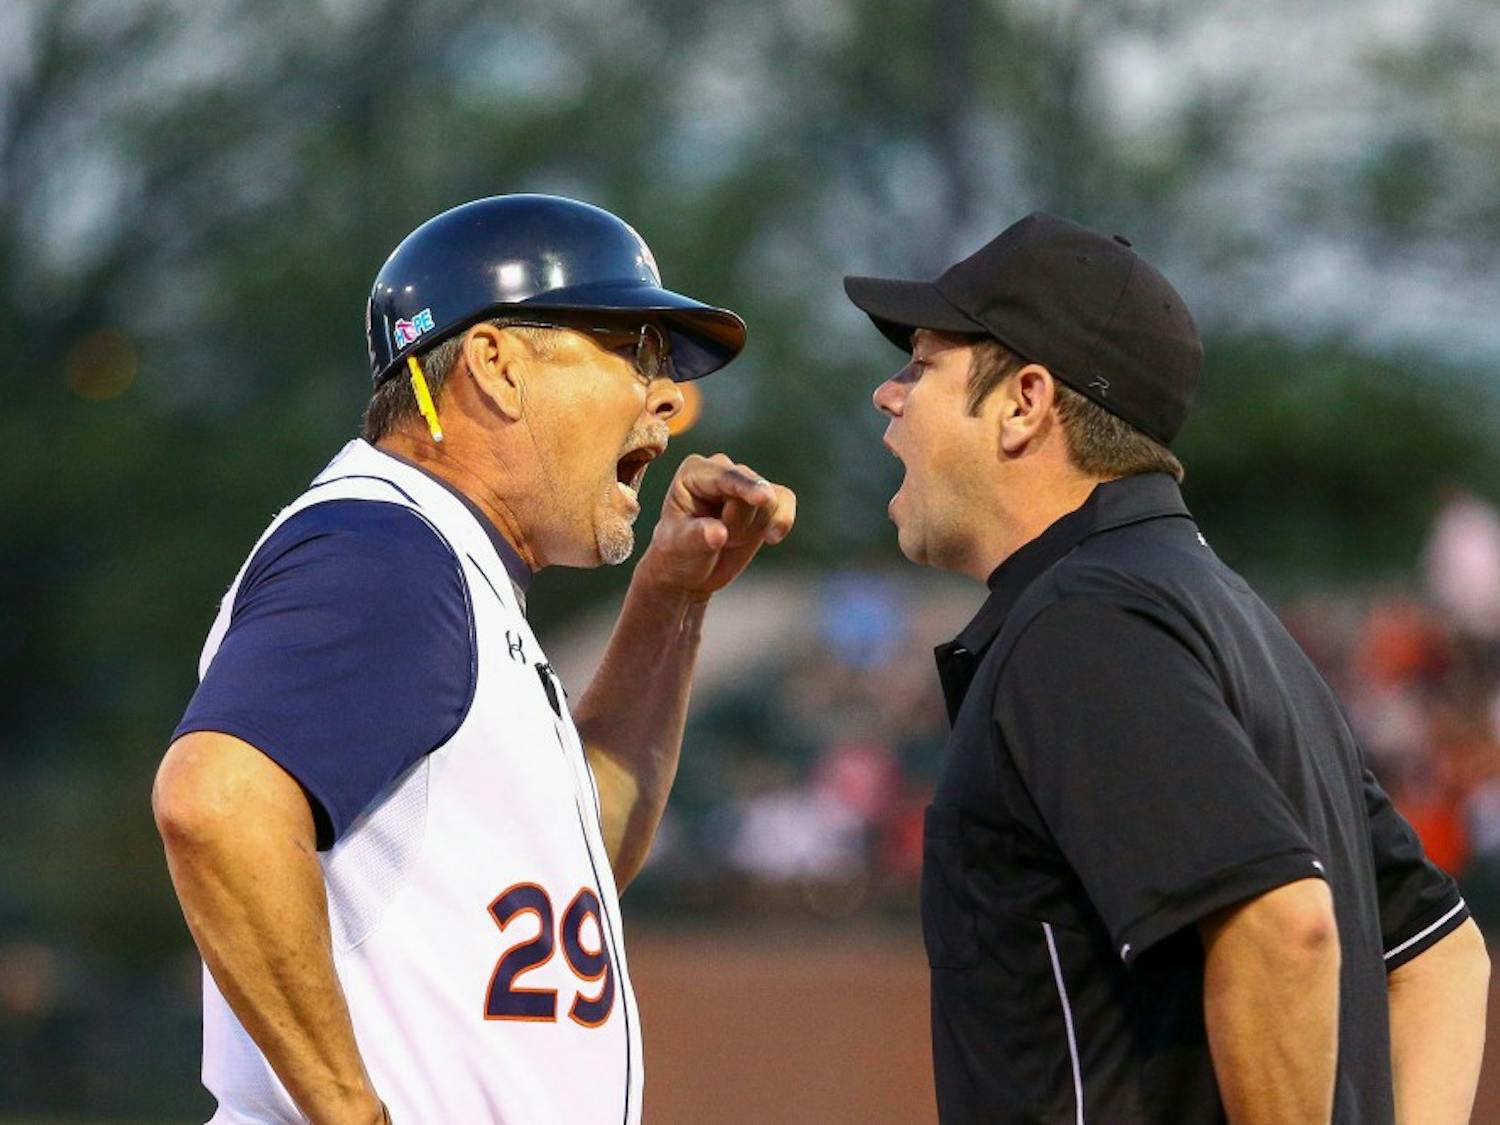 Sonny Golloway argues a call with the umpire. (file)